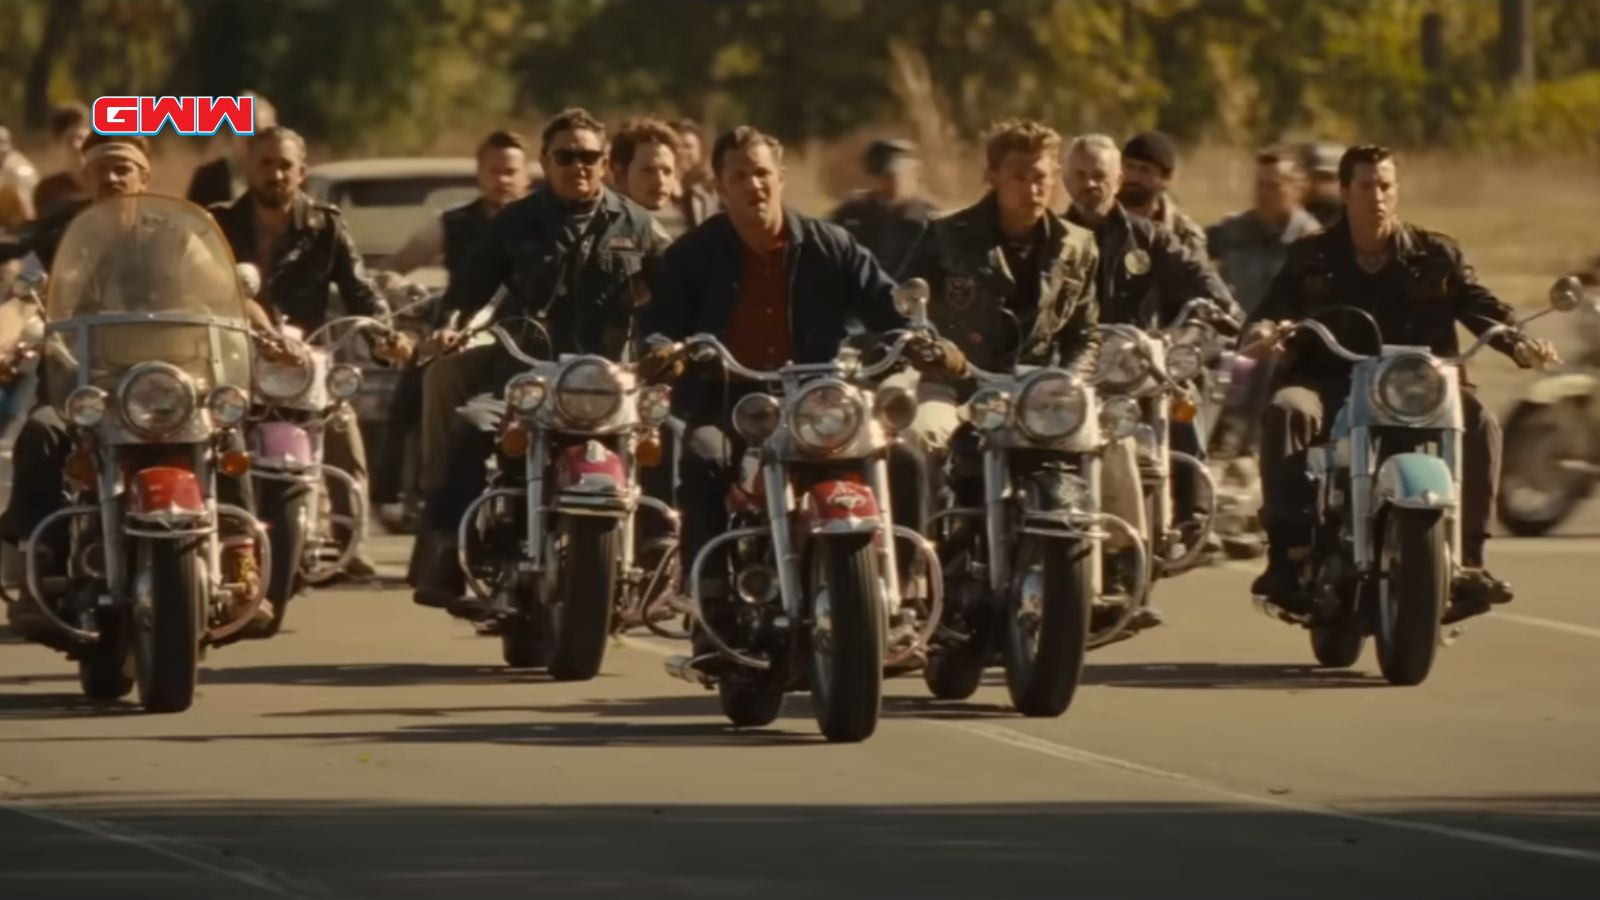 A group of bikers riding motorcycles on a road together.